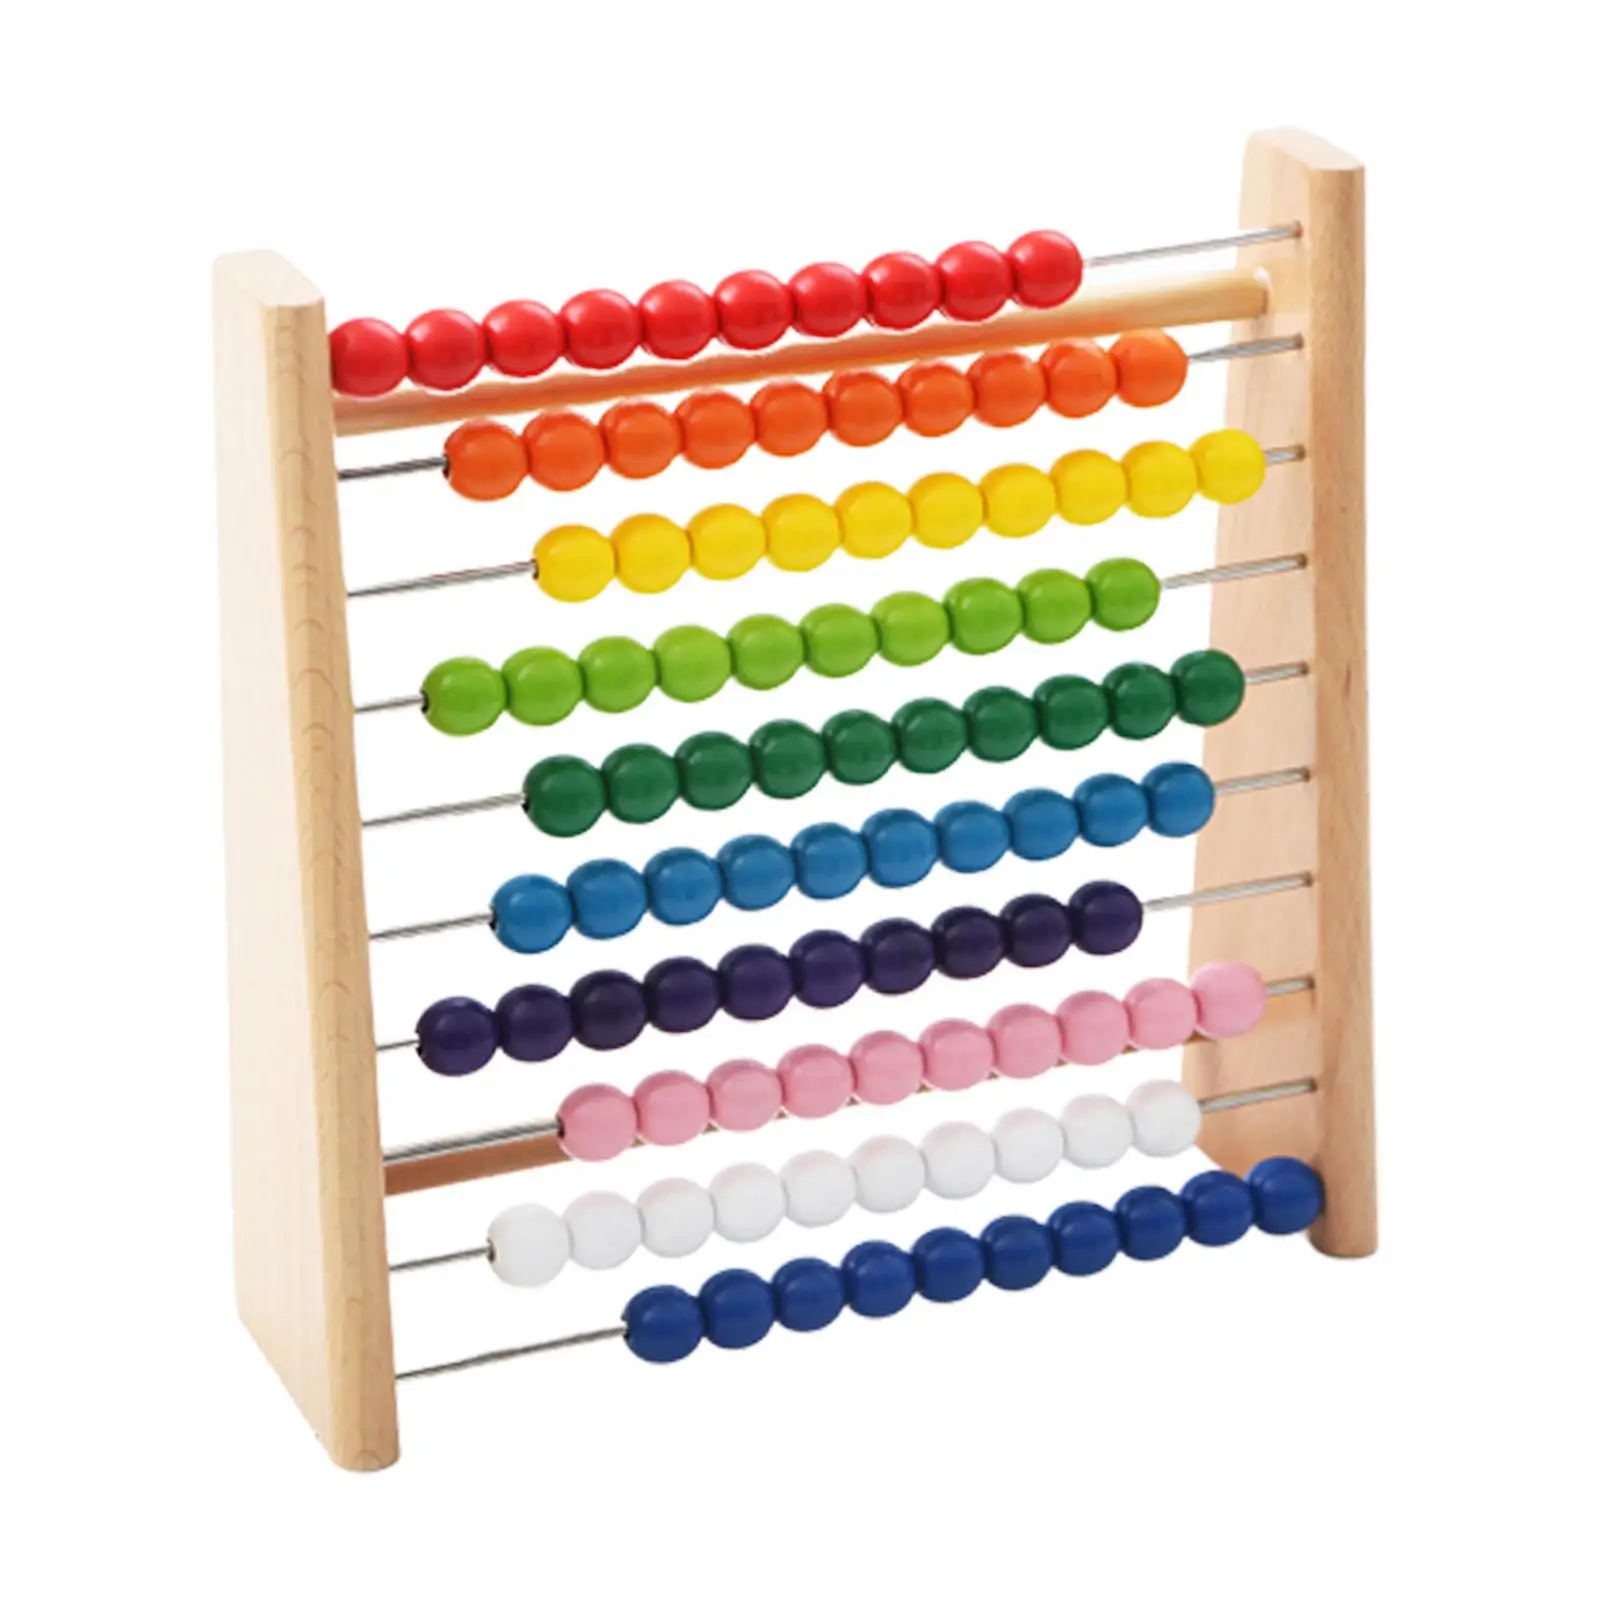 Children Rainbow Counting Beads Counting Learning Toy Addition Subtraction Counting Frames Toy for Kids Children Holiday Gifts